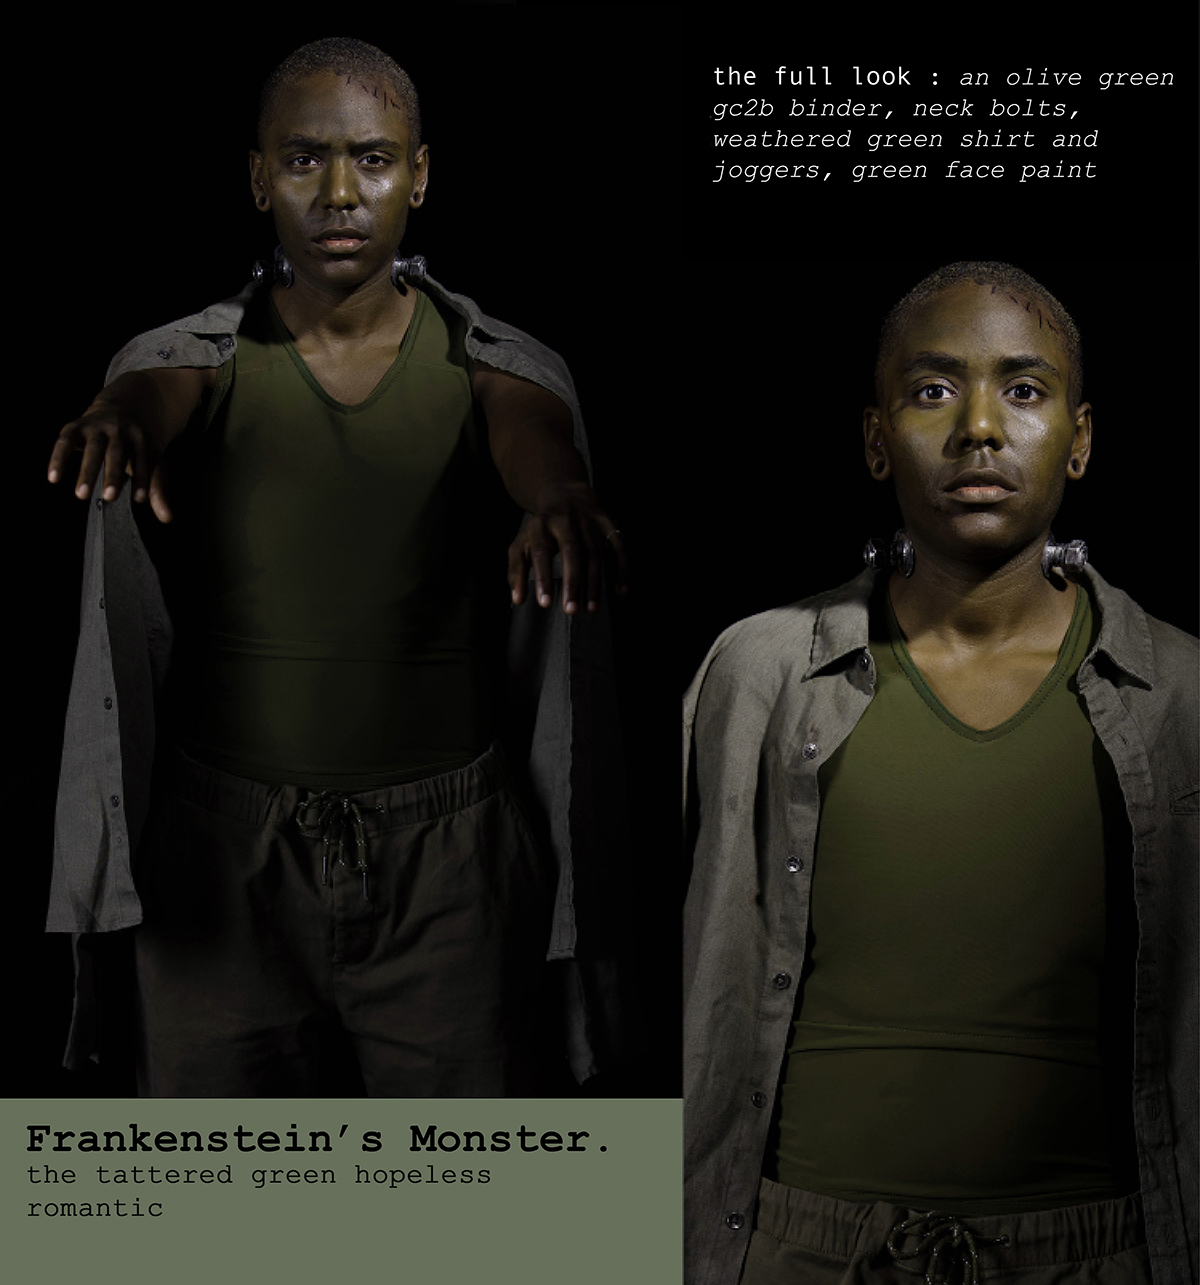 frankenstein's monster. the tattered green hopeless romantic / the full look: an olive green gc2b binder, neck bolts, weathered green shirt and joggers, green face paint